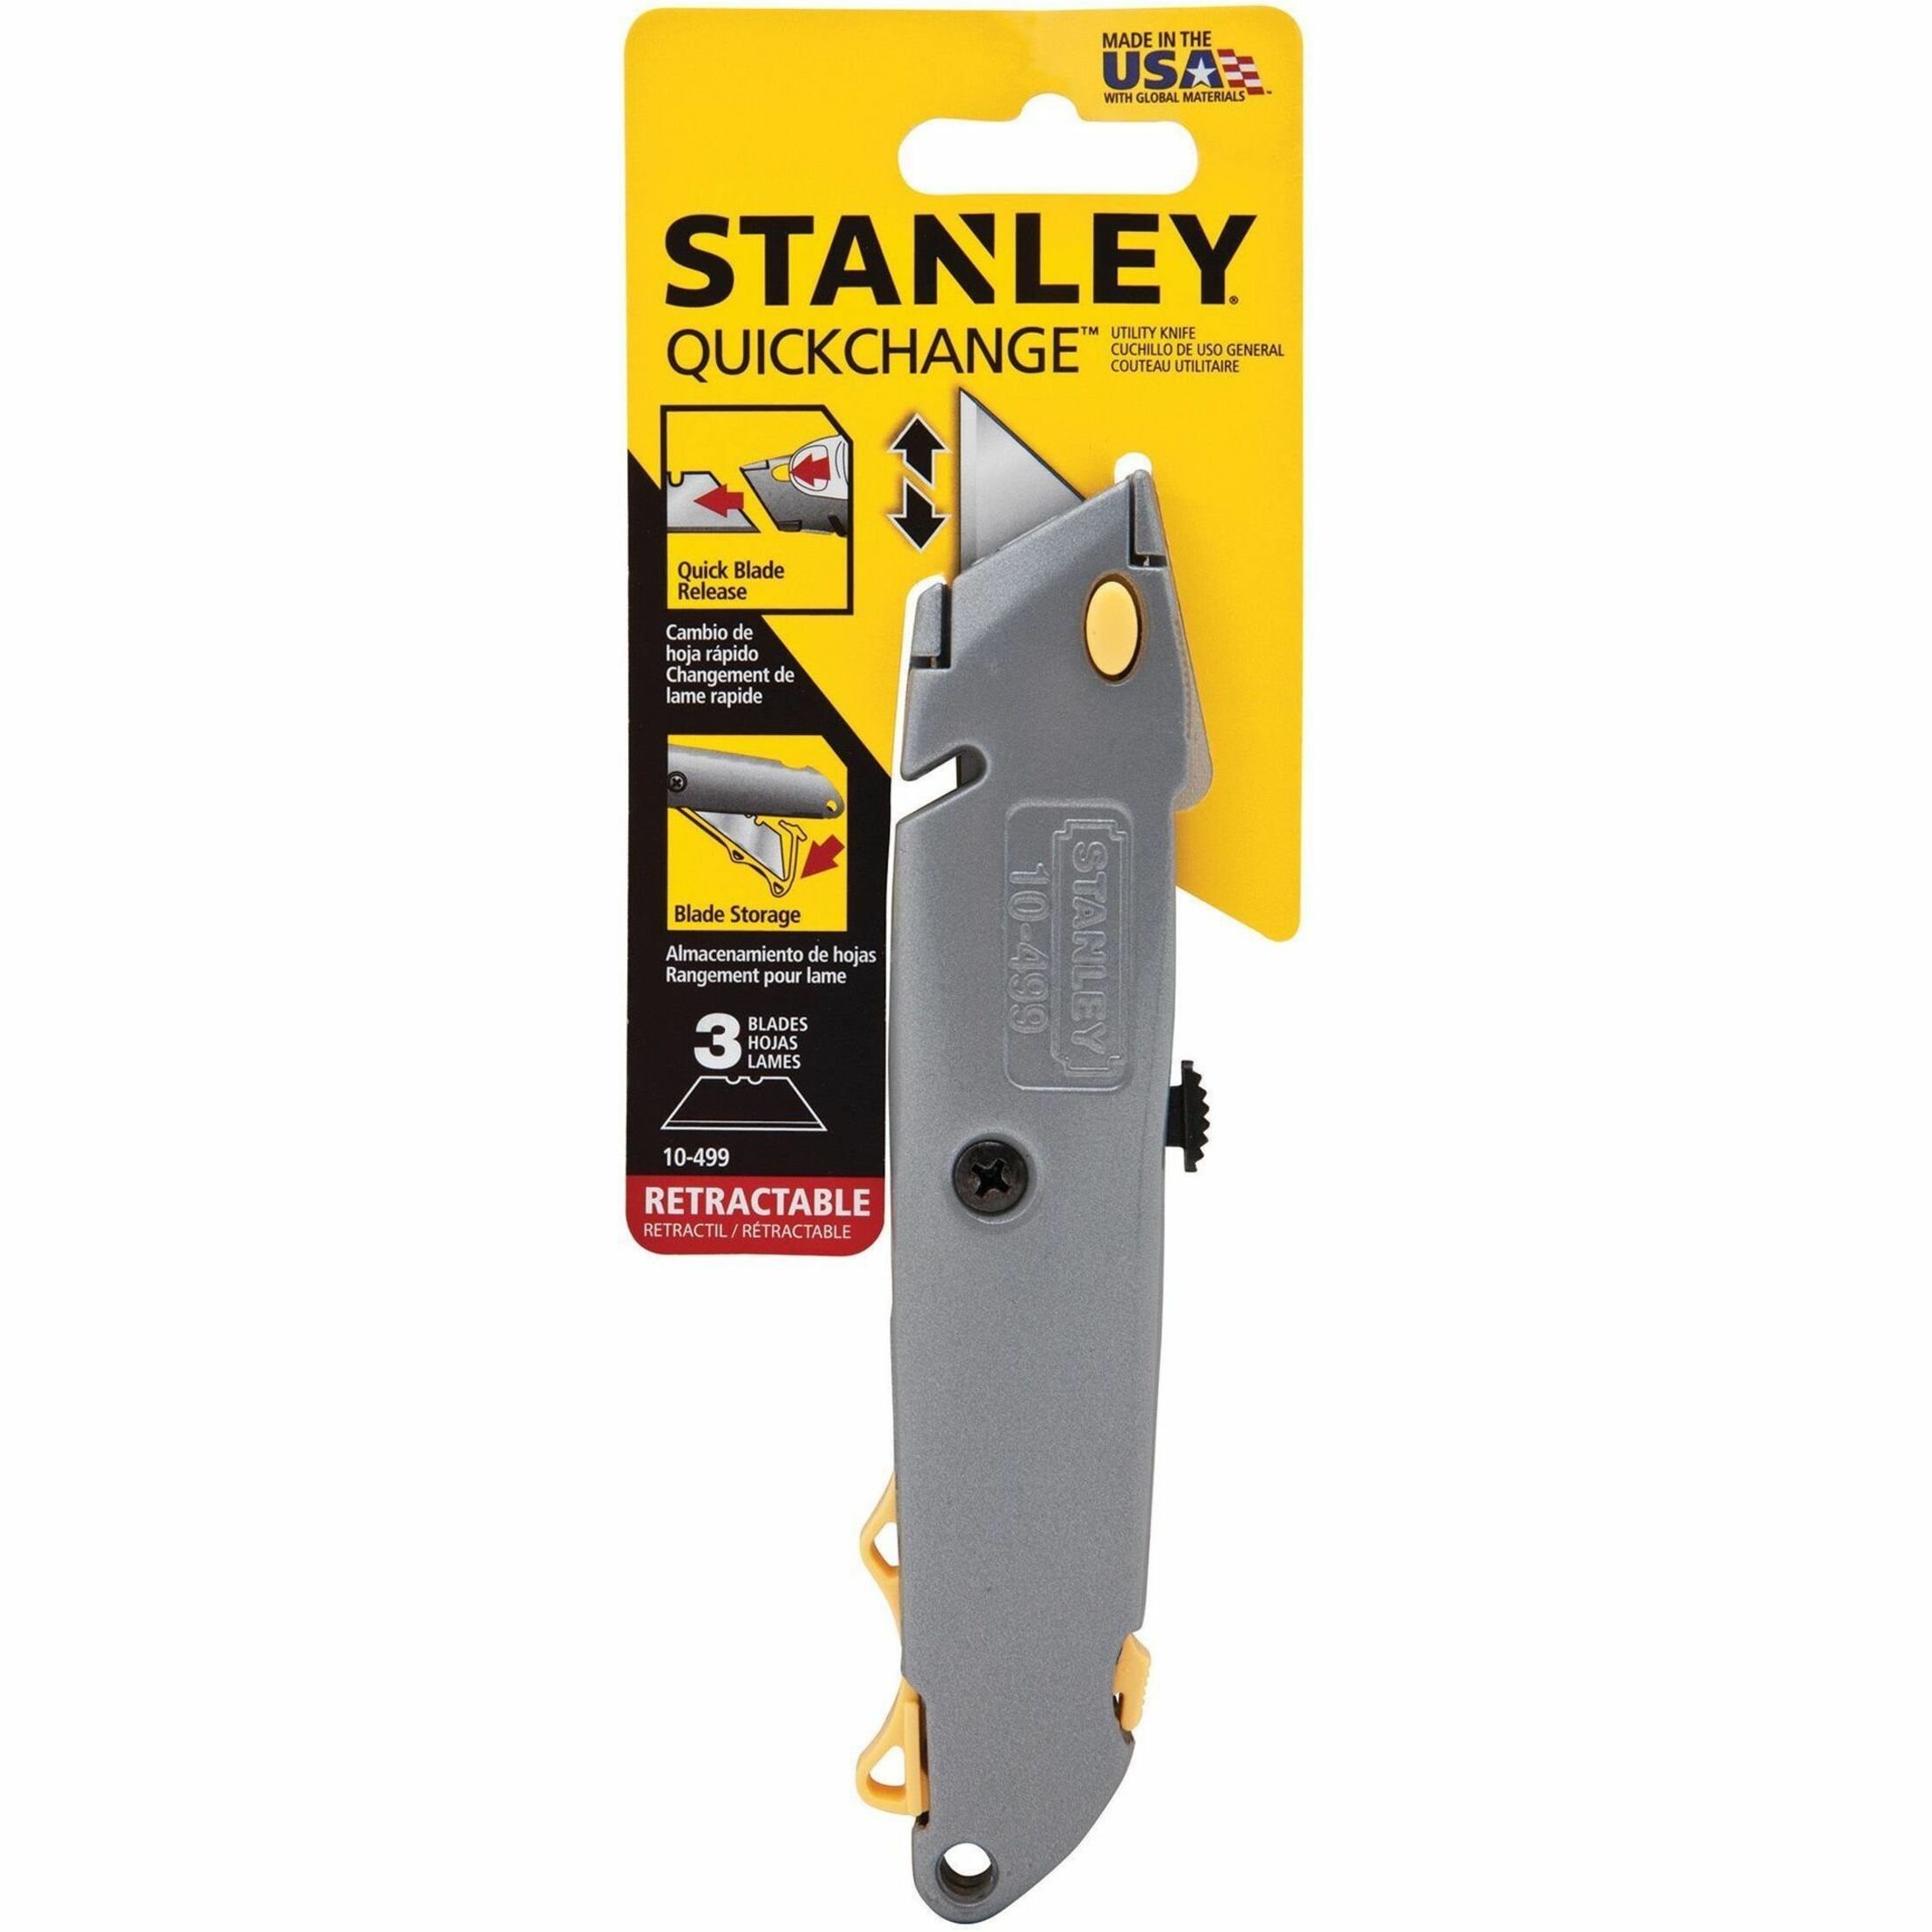 Stanley, BOS10499, Quick-Change Utility Knife, 1 Each, Black,Silver - image 3 of 4